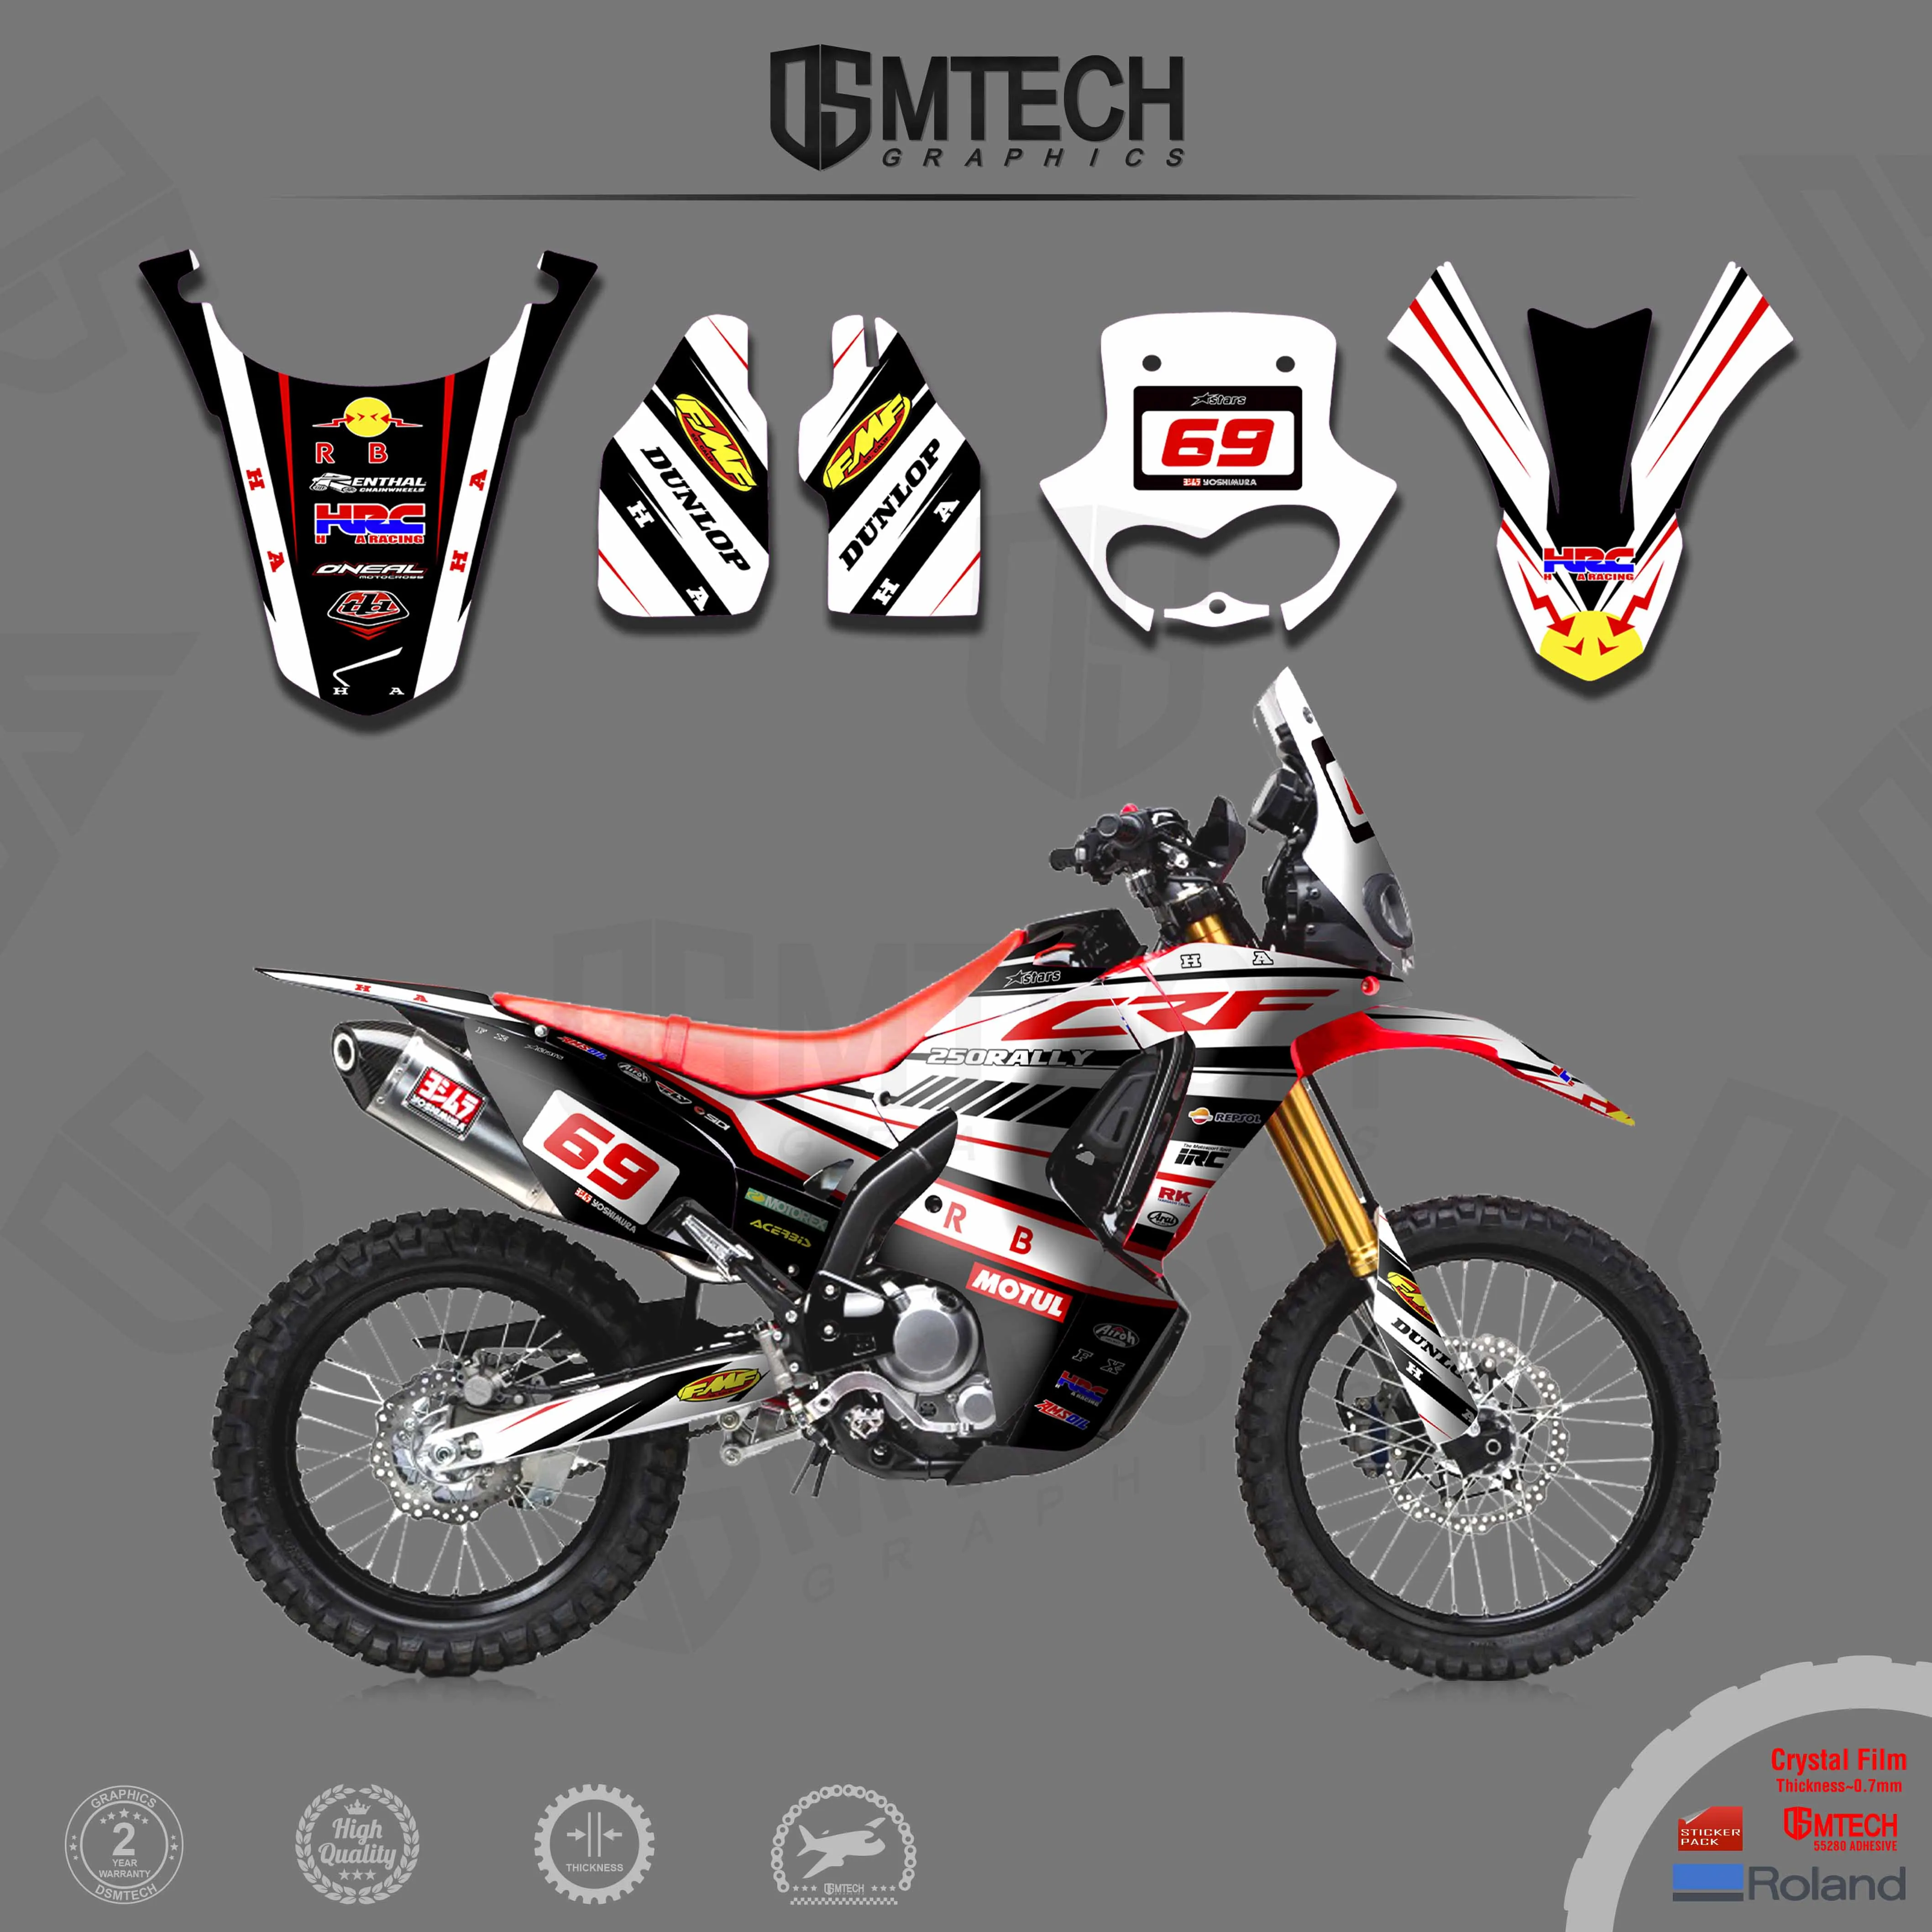 

DSMTECH Full Set of Stickers Kits Motorcycle Graphics Backgrounds Decals For Honda CRF250 RALLY 2017 2018 2019 2020 001